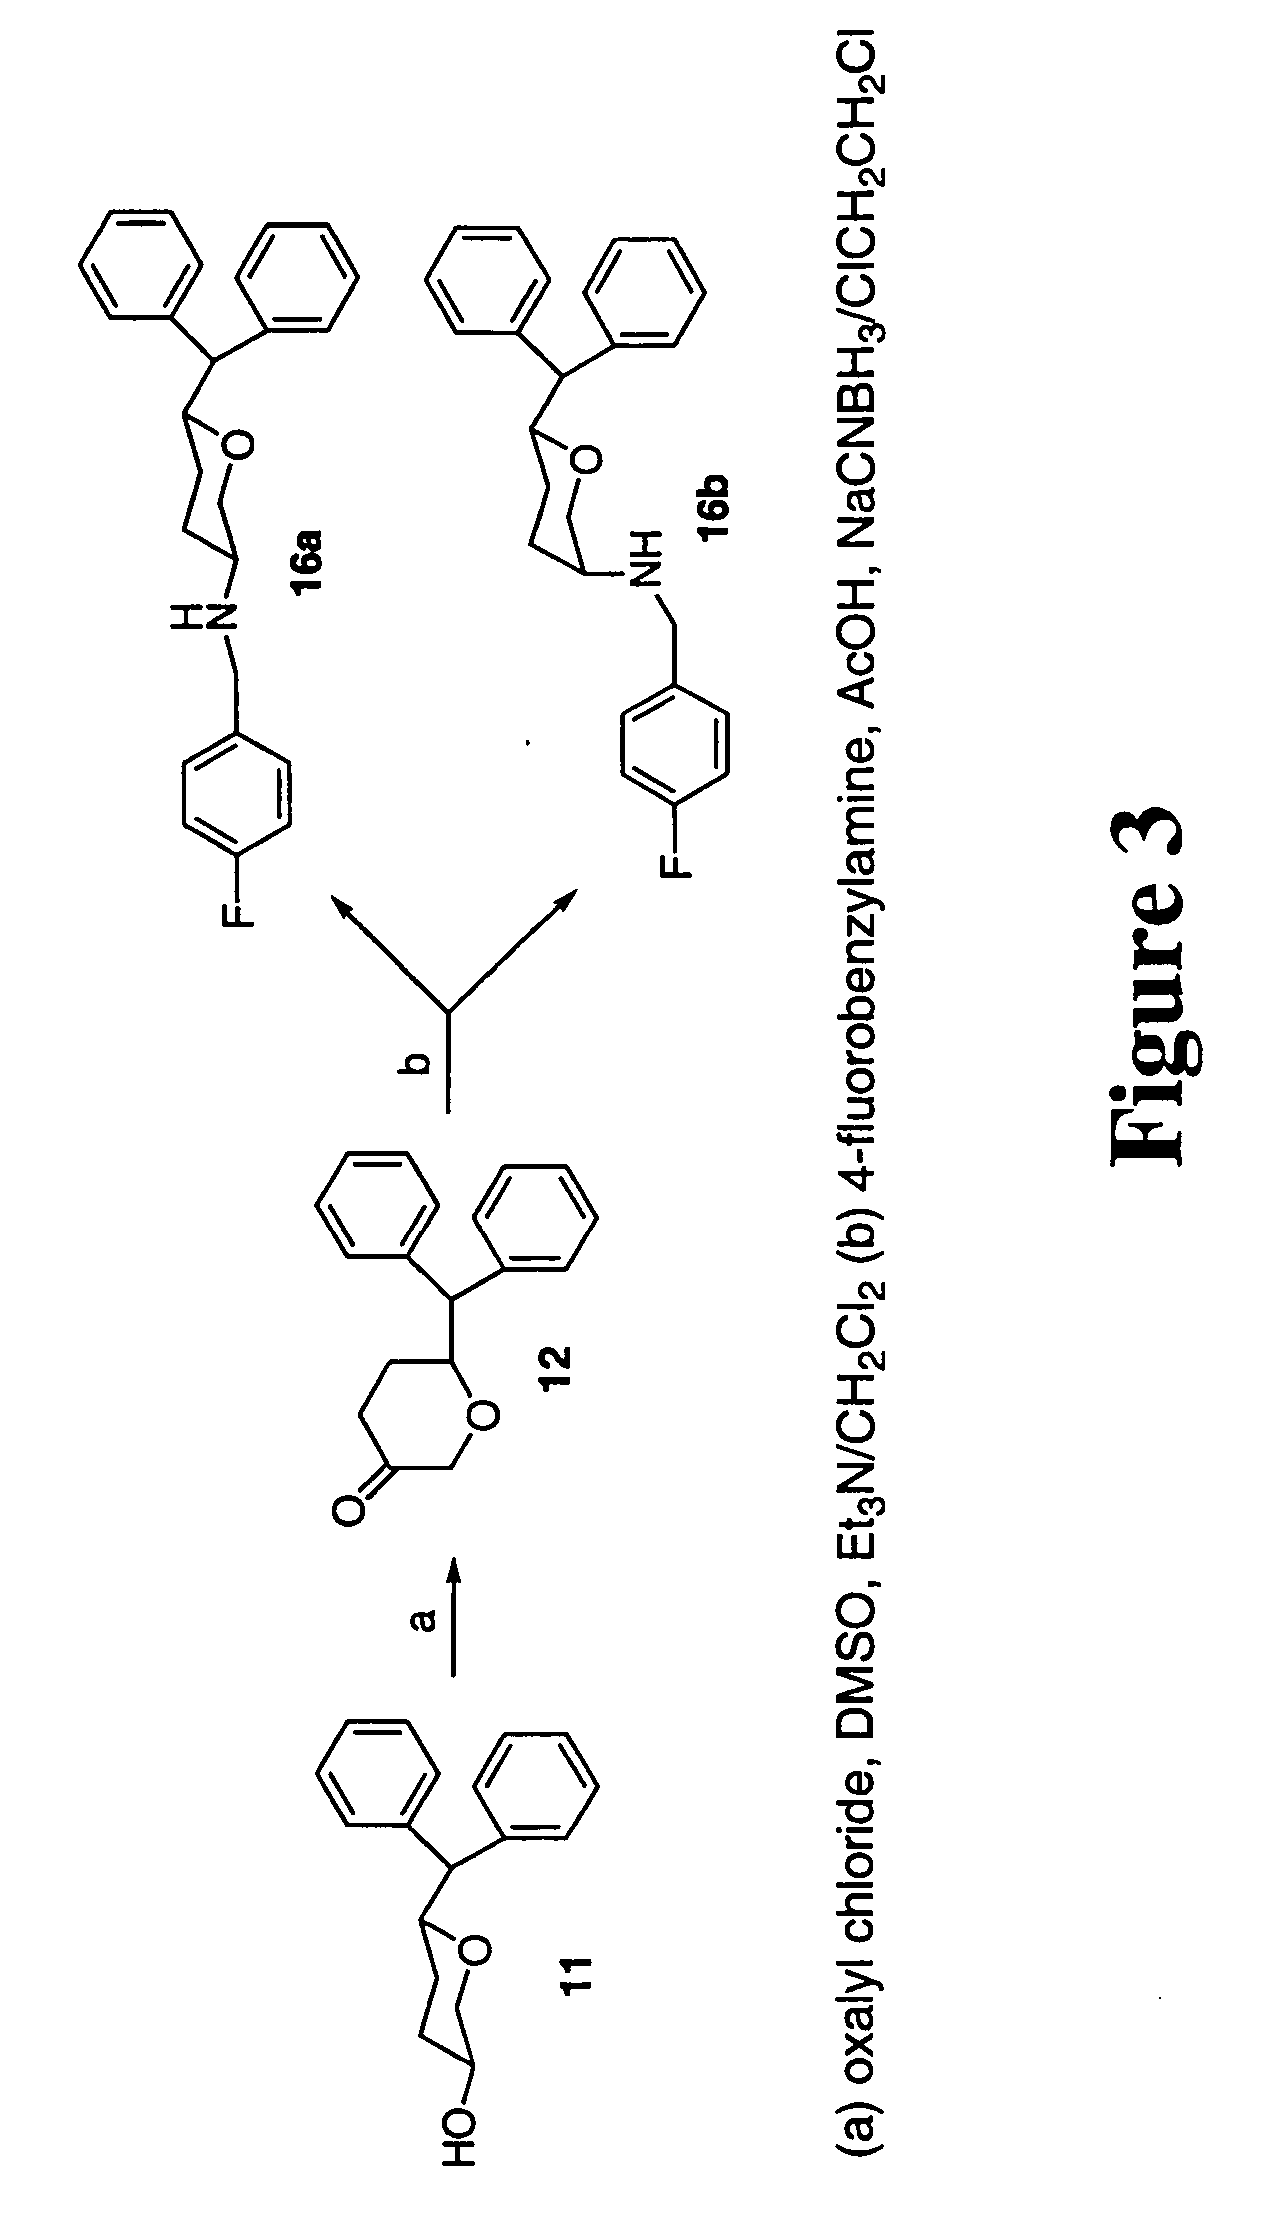 Tri-substituted 2-benzhydryl-5-benzlamino-tetrahydro-pyran-4-ol and 6-benzhydryl-4-benzylamino-tetrahydro-pyran-3-ol analogues, and novel 3,6-disubstituted pyran derivatives